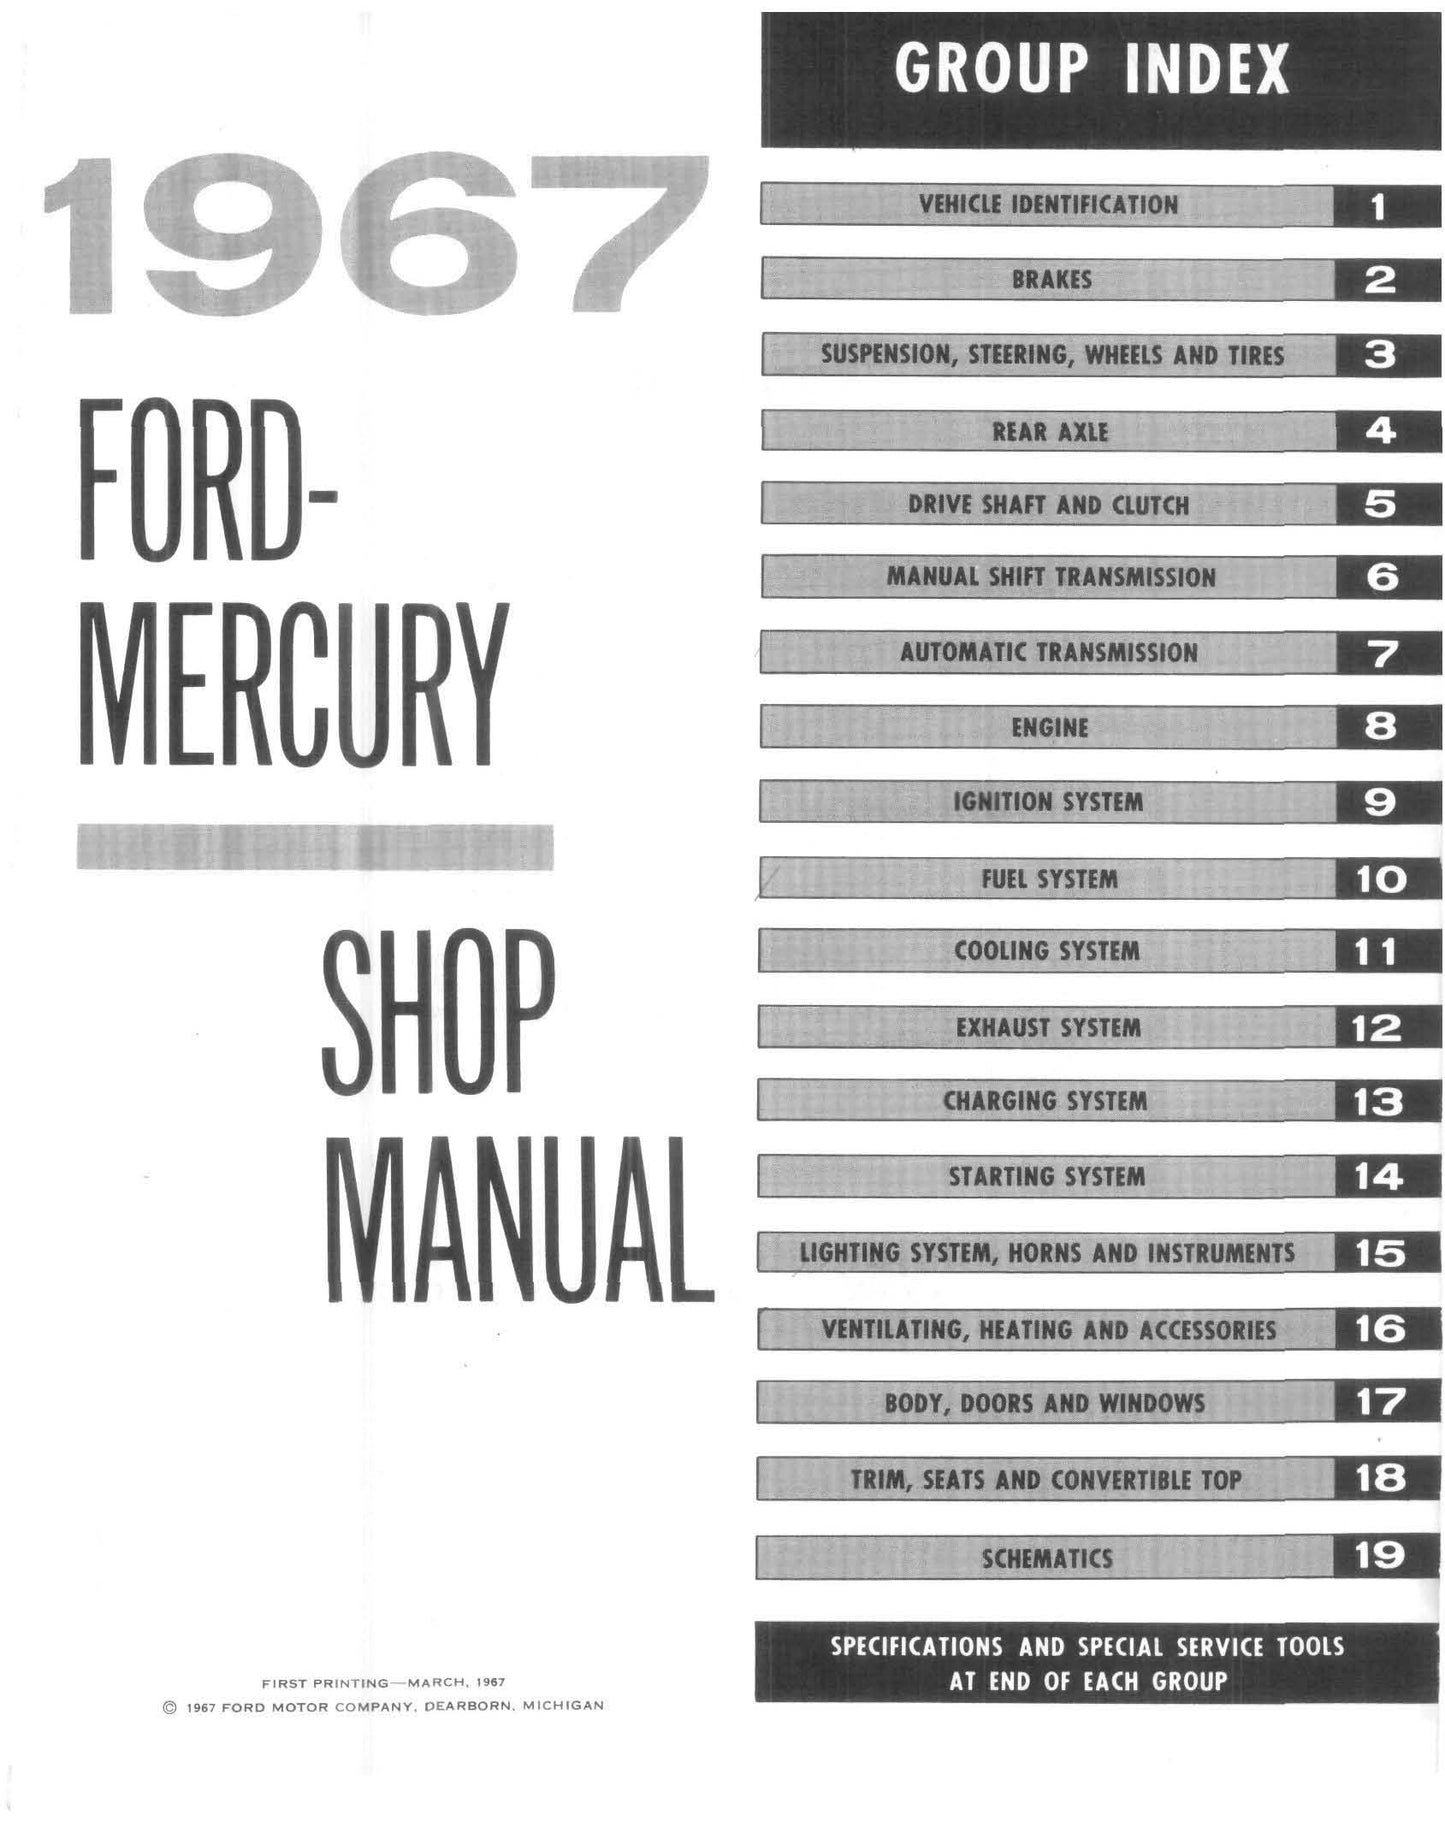 1967 Ford Truck Shop Manual